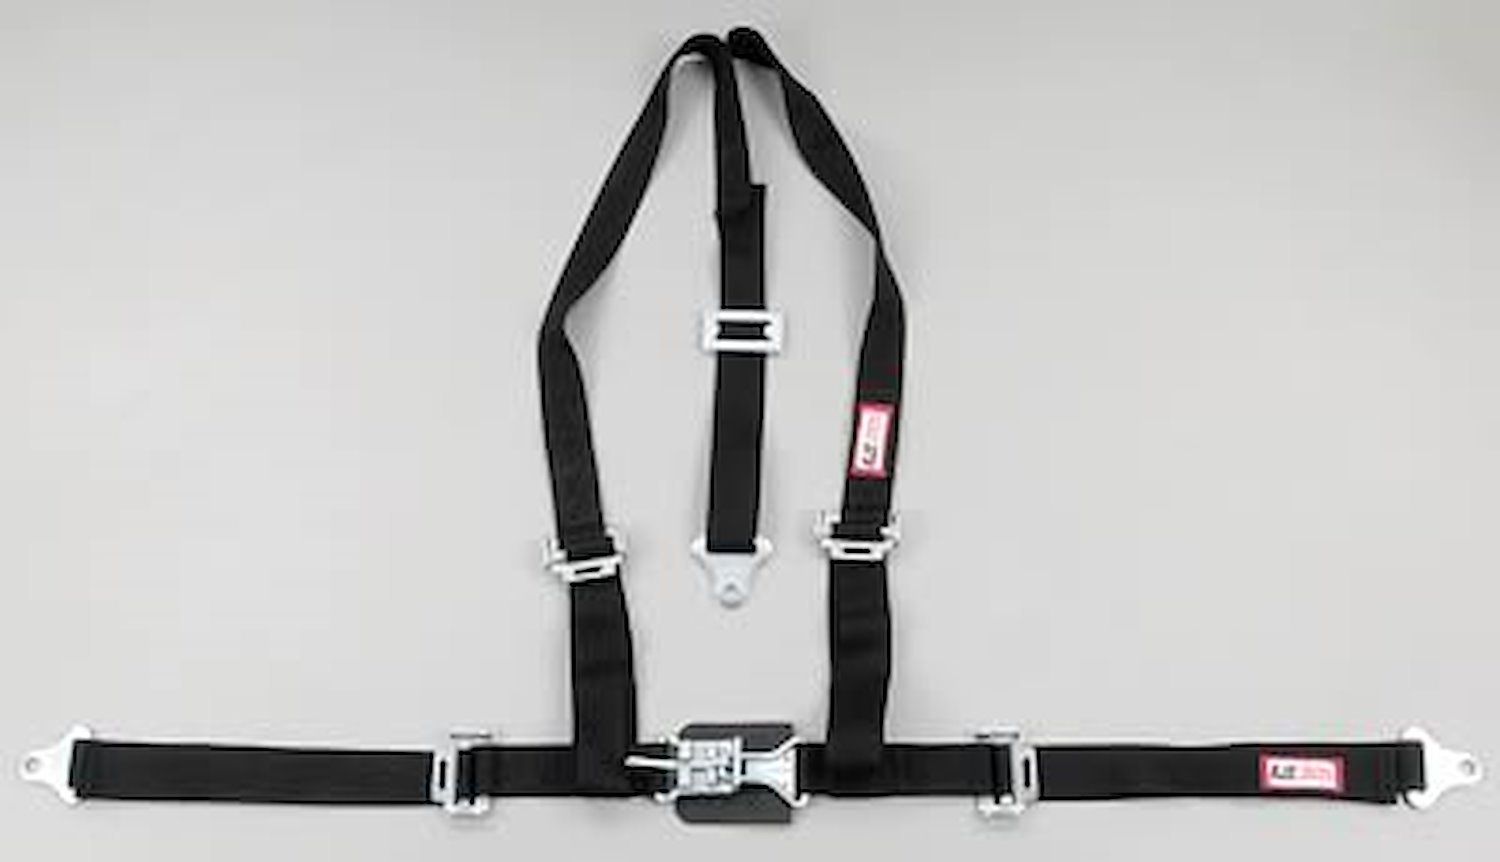 NON-SFI L&L HARNESS 2 PULL UP Lap Belt SNAP SEWN IN 2 S.H. V ROLL BAR Mount BOLT RED